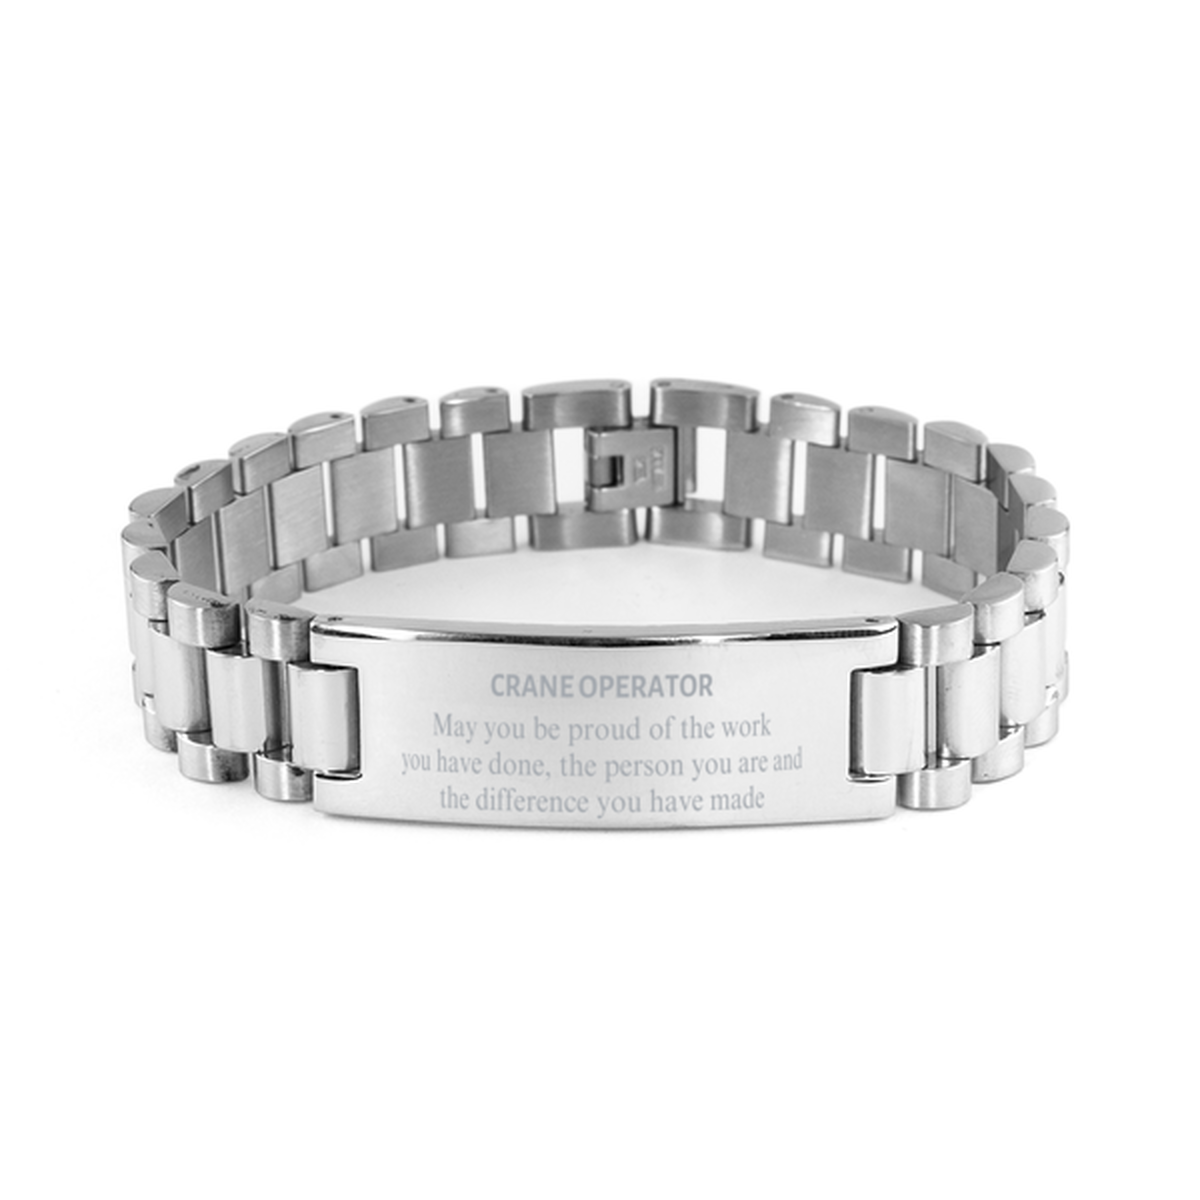 Crane Operator May you be proud of the work you have done, Retirement Crane Operator Ladder Stainless Steel Bracelet for Colleague Appreciation Gifts Amazing for Crane Operator